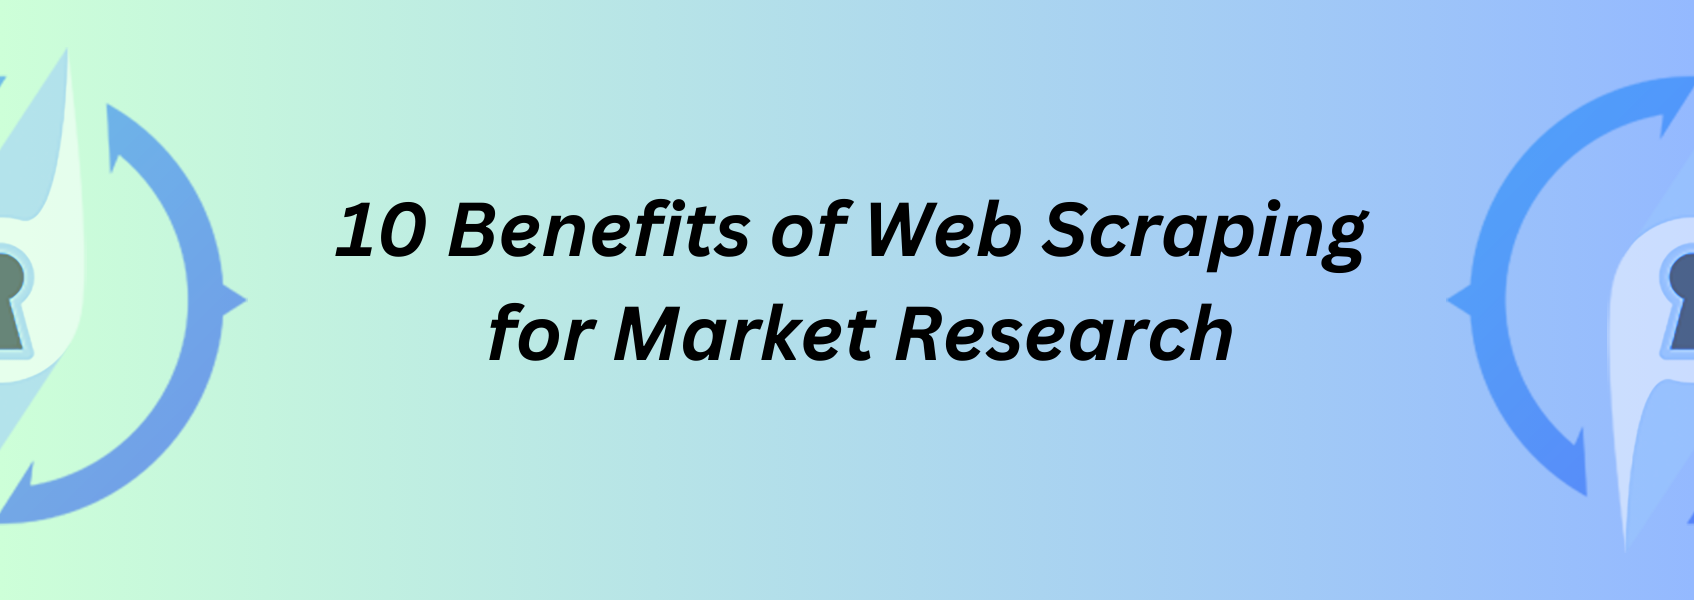 10 Benefits of Web Scraping for Market Research